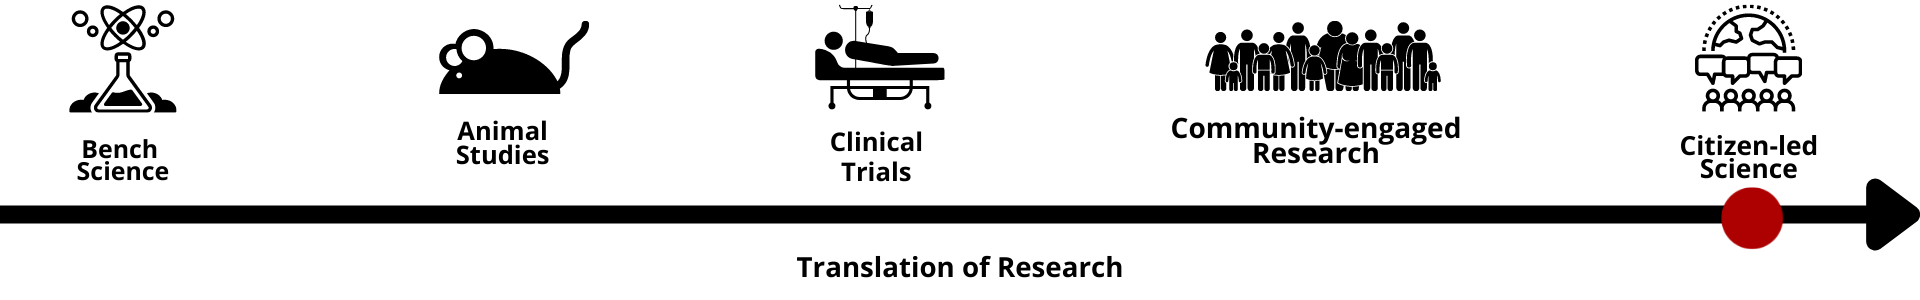 Translation of Research that shows different stages of research on a timeline. The steps are: Bench Science, Animal Studies, Clinical Trials, Community-engaged Research and Citizen-led Science